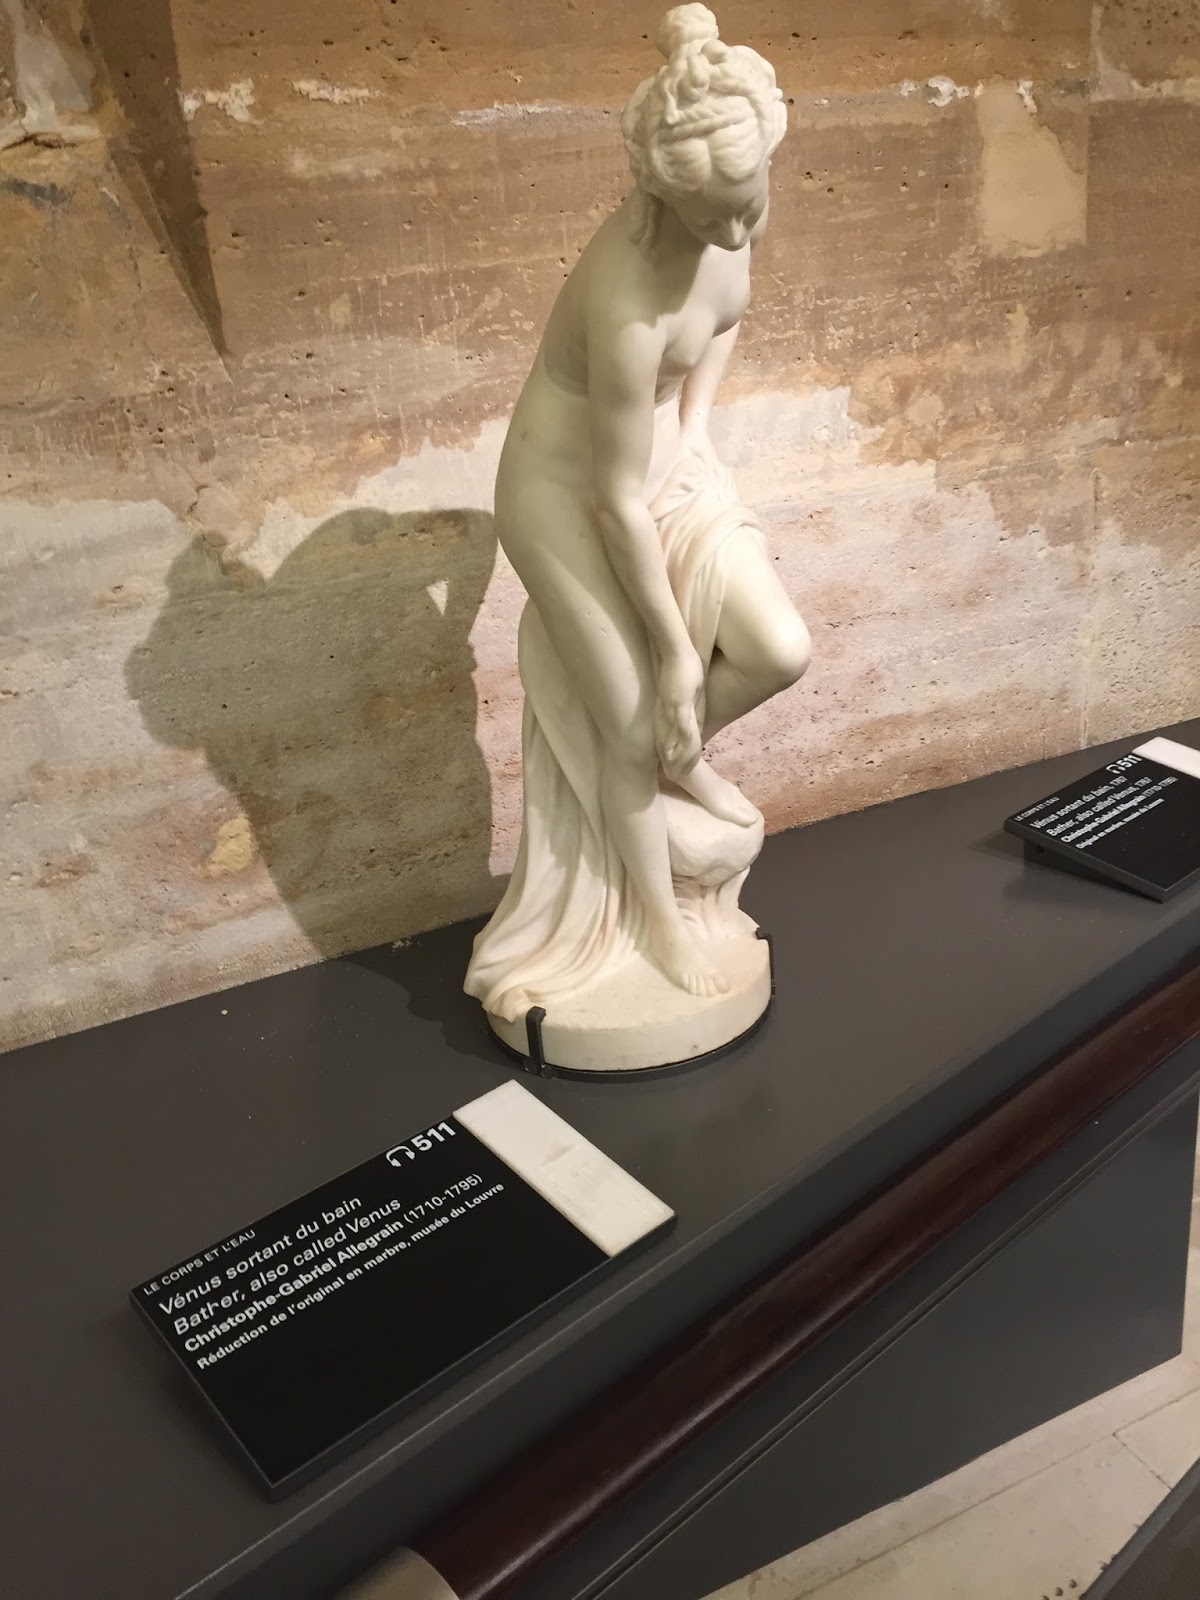 A picture of a small white statue of a woman who is bending down to dry herself off after a bath. This is a reproduction of Allegrain's *Venus After the Bath* which can be touched by visually impaired visitors at the Louvre's tactile gallery